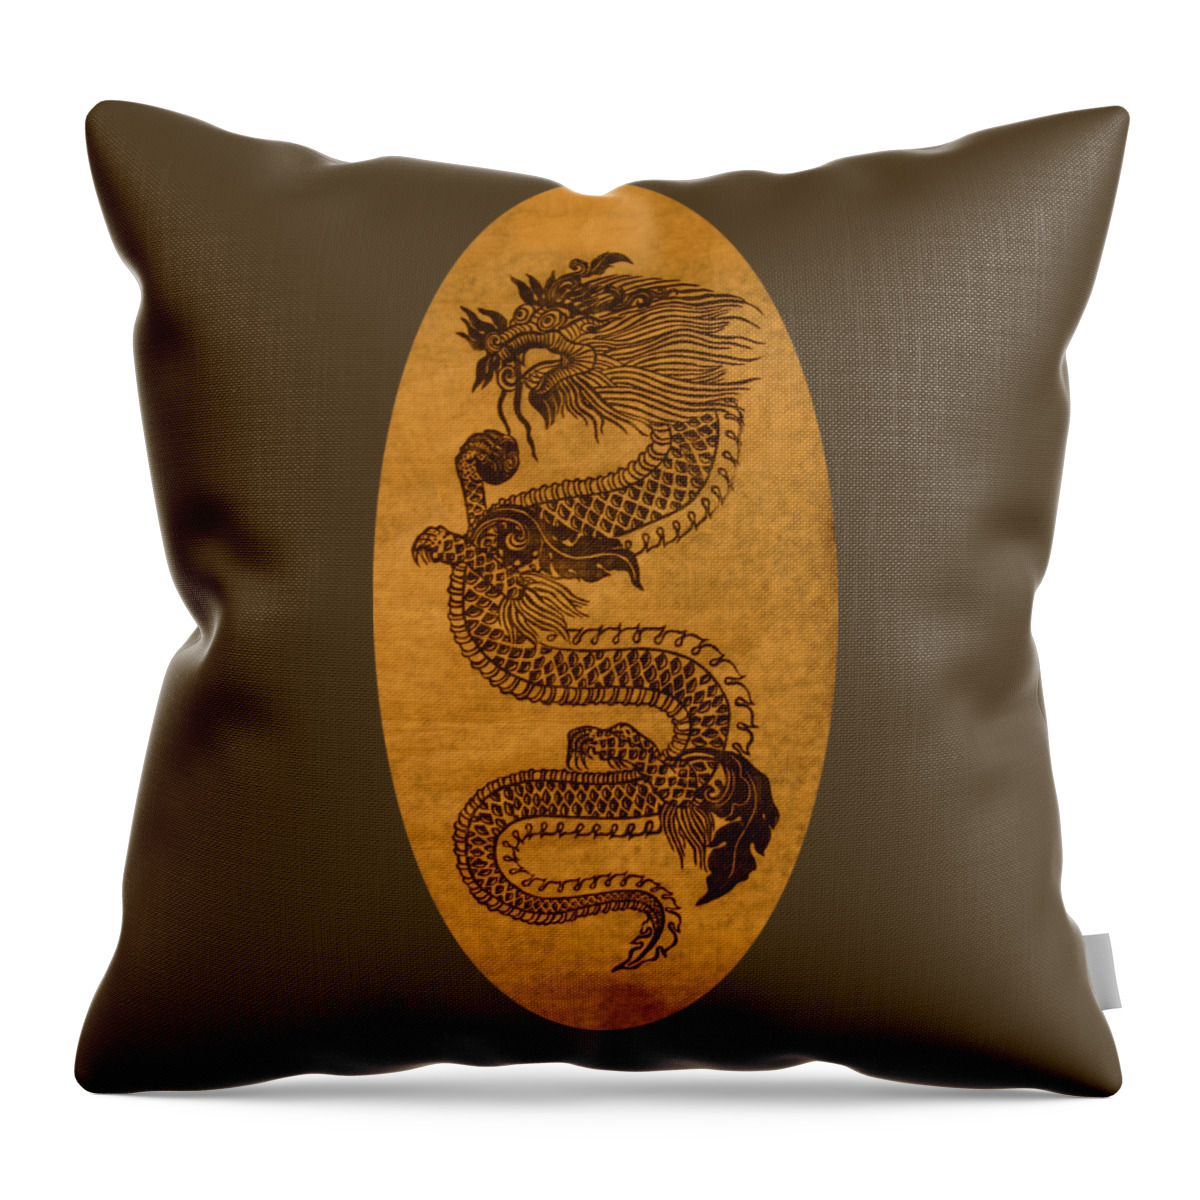 Dragon Throw Pillow featuring the photograph Dragon by Robert E Alter Reflections of Infinity